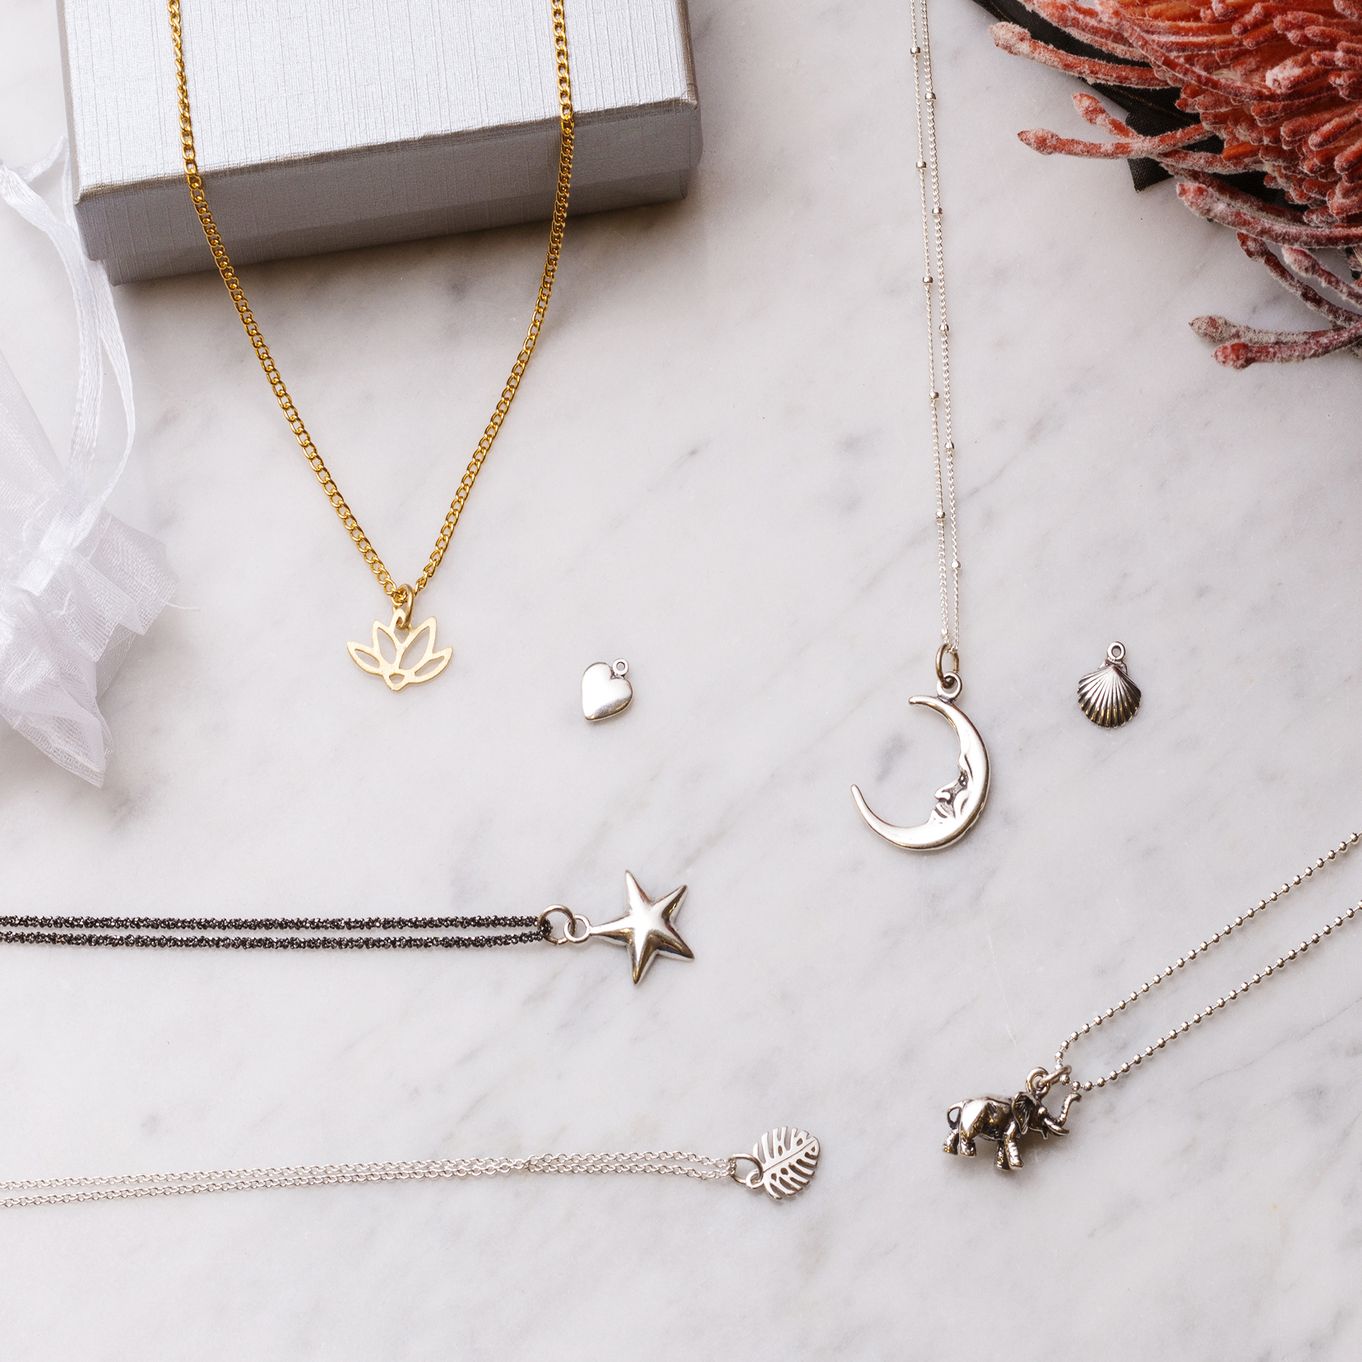 How To Make An Easy Charm Necklace